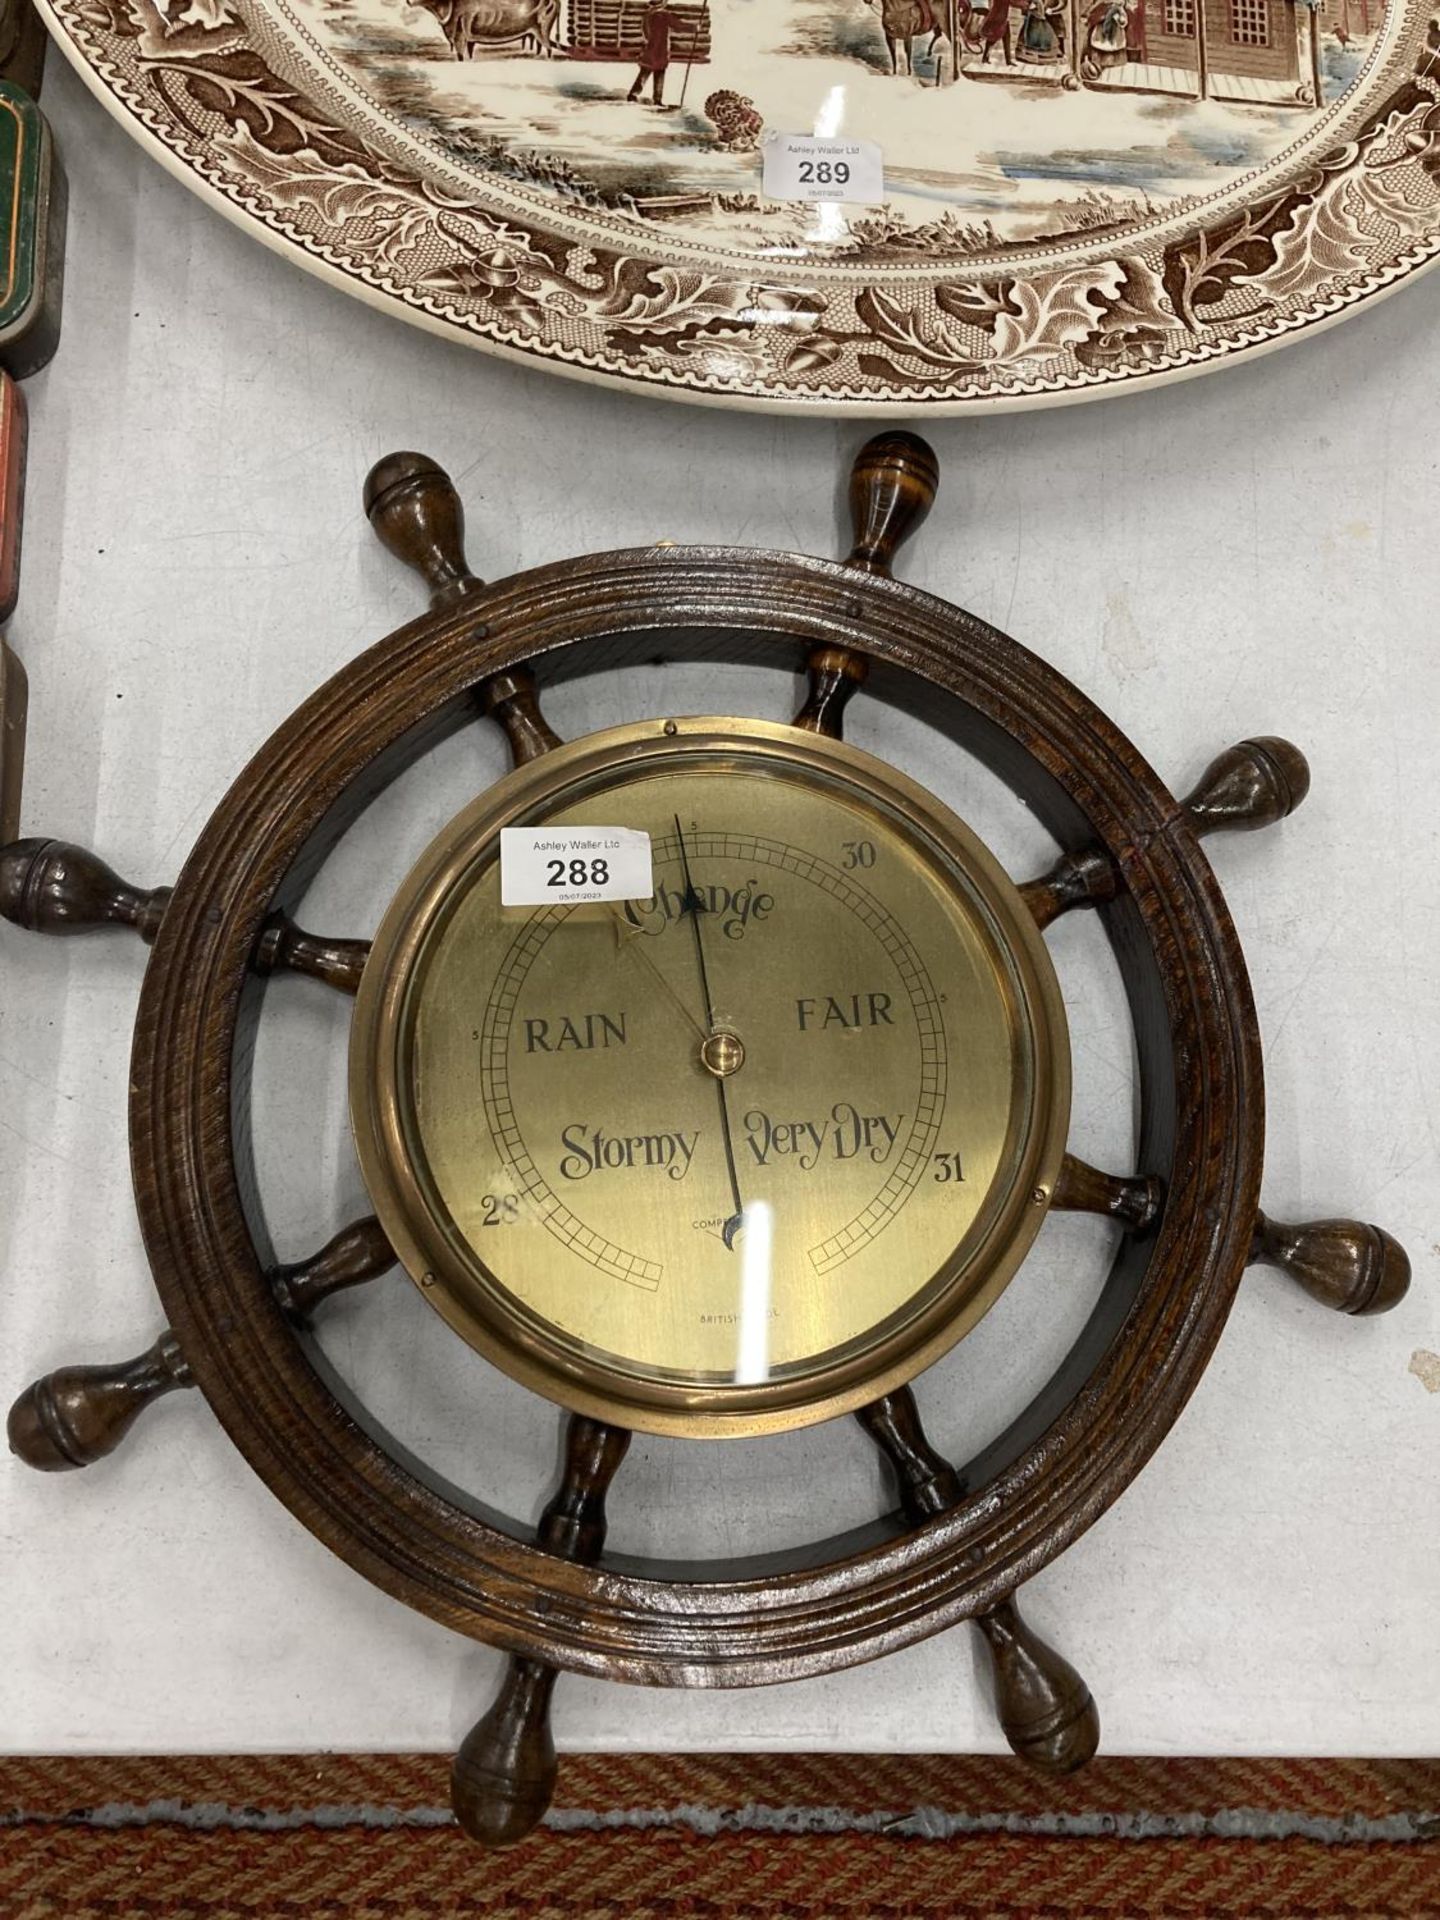 A BRASS FACED BAROMETER IN A WOODEN SHIPS WHEEL